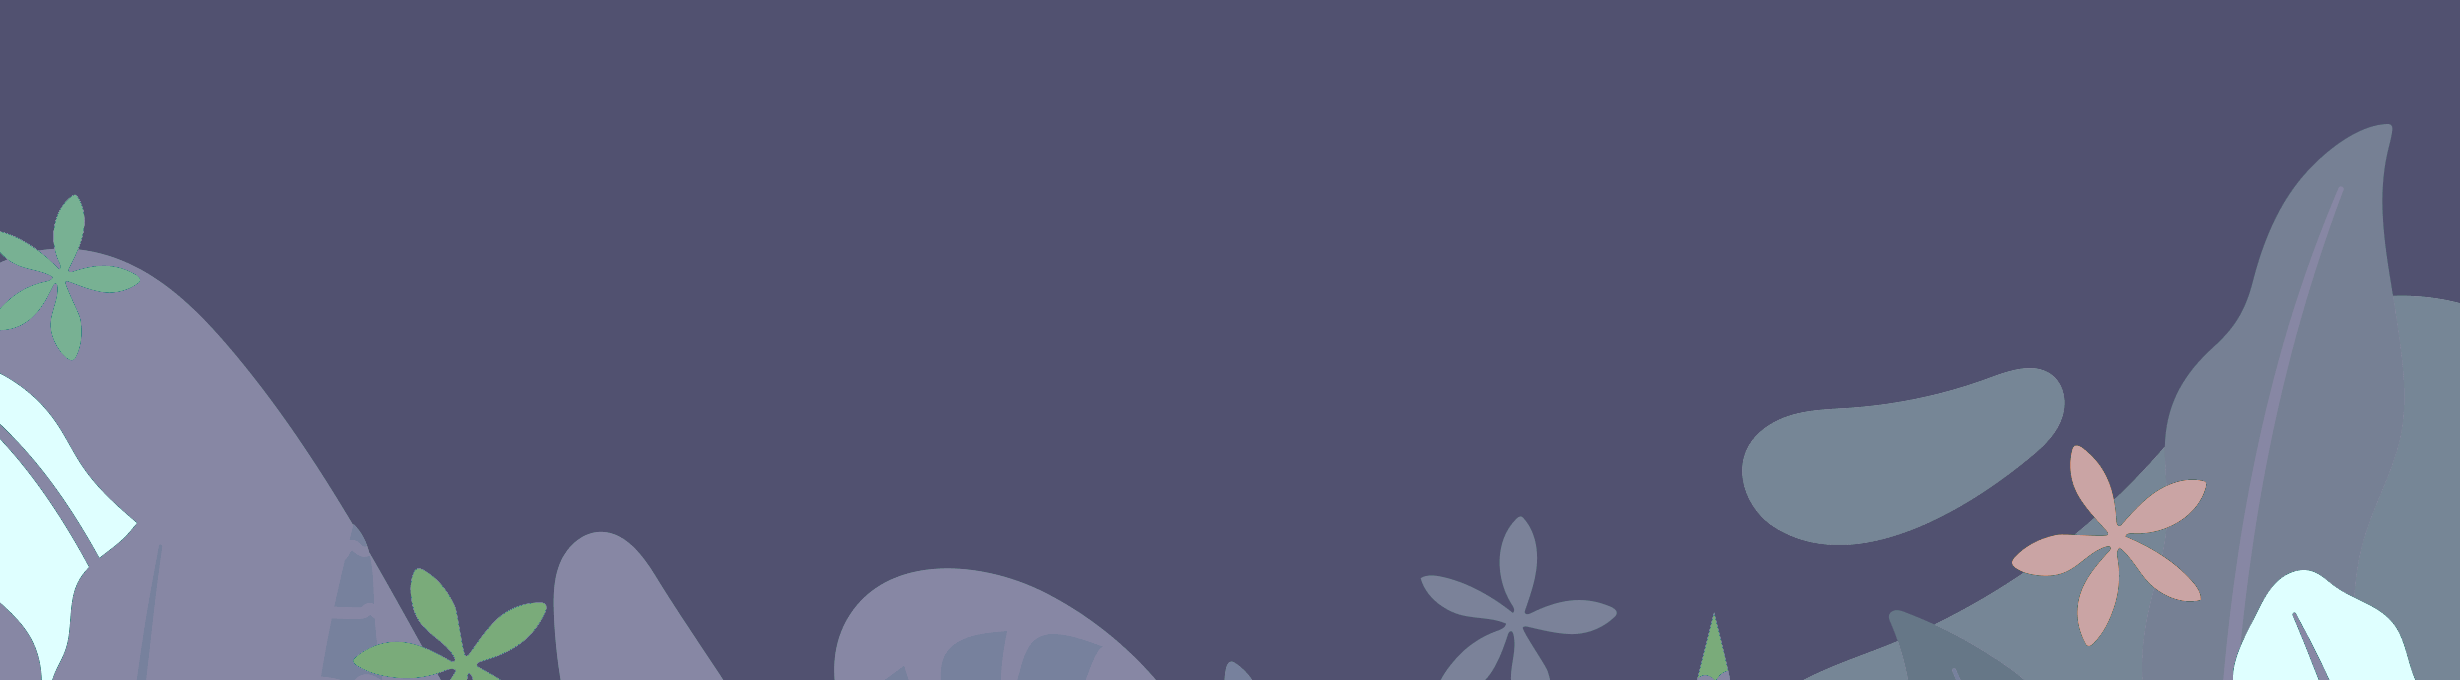 purple background with flower illustrations 